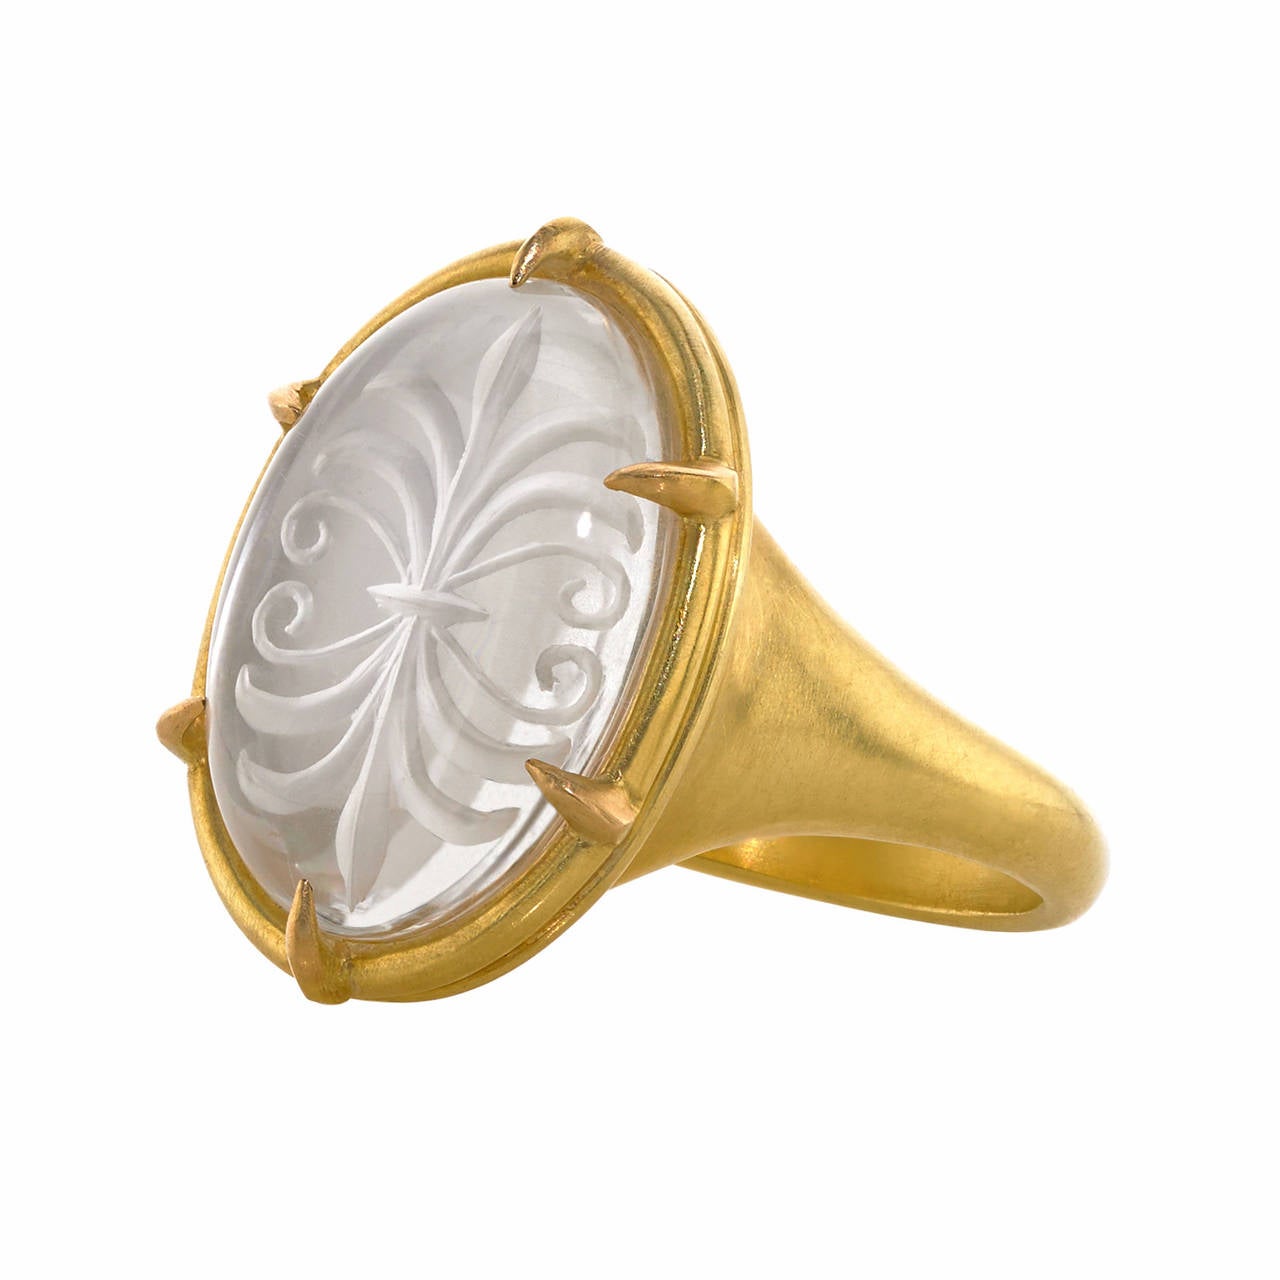 One-of-a-Kind Ring handcrafted in 22k yellow gold with a hand-carved quartz intaglio prong set over a mother-of-pearl back with beautiful, understated coloration. The carving in the gemstone is set directly against the mother-of-pearl, allowing the